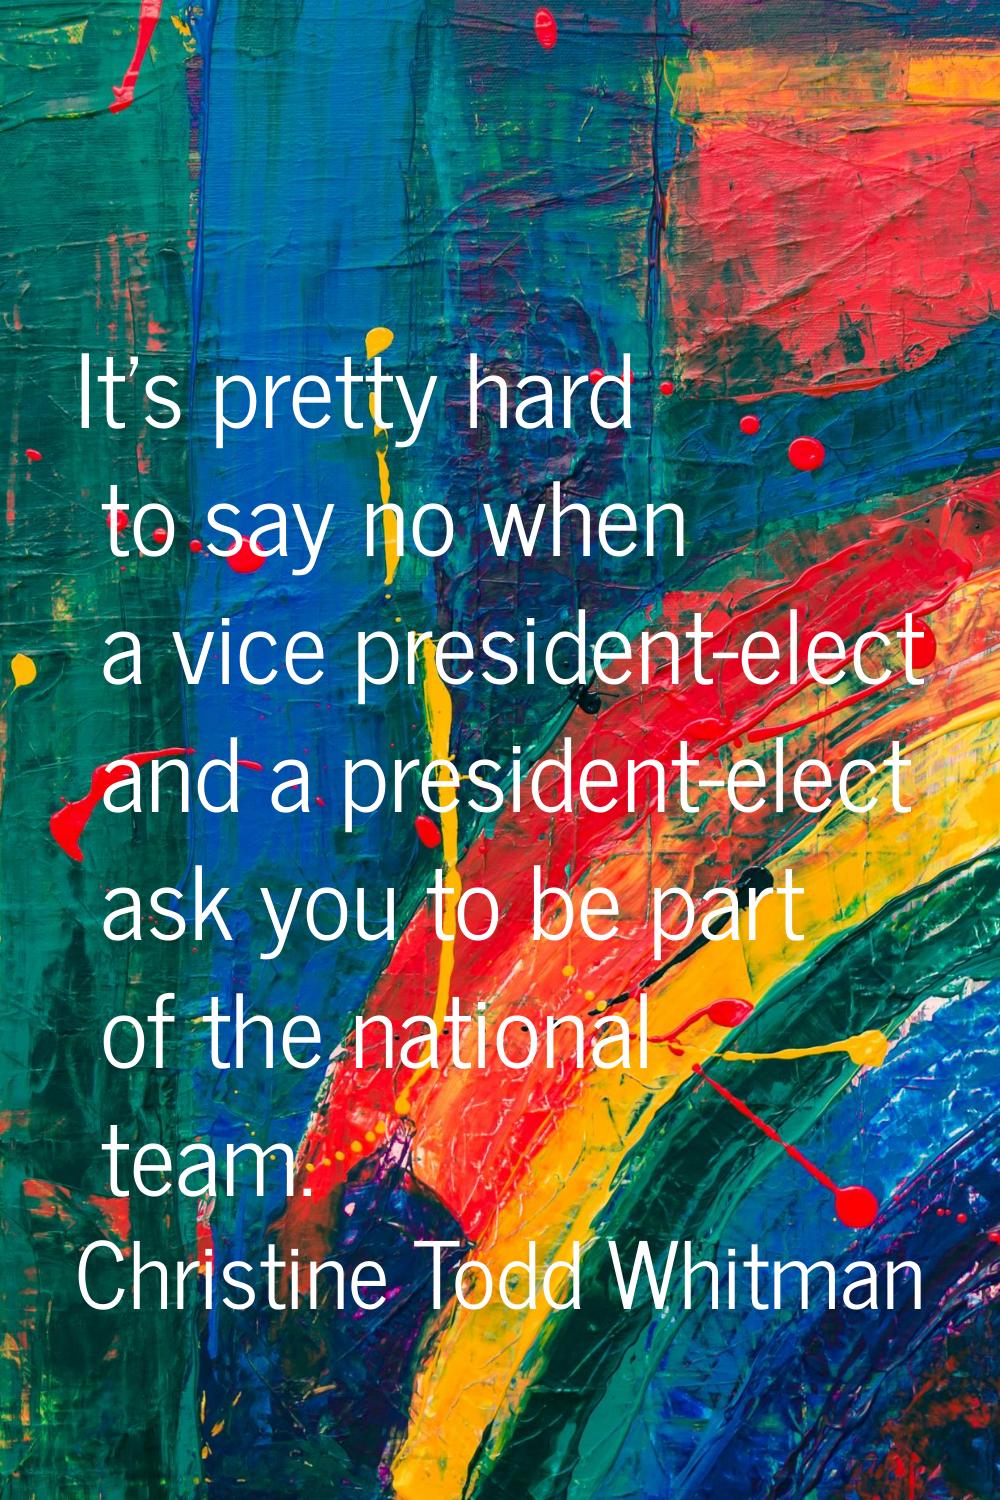 It's pretty hard to say no when a vice president-elect and a president-elect ask you to be part of 